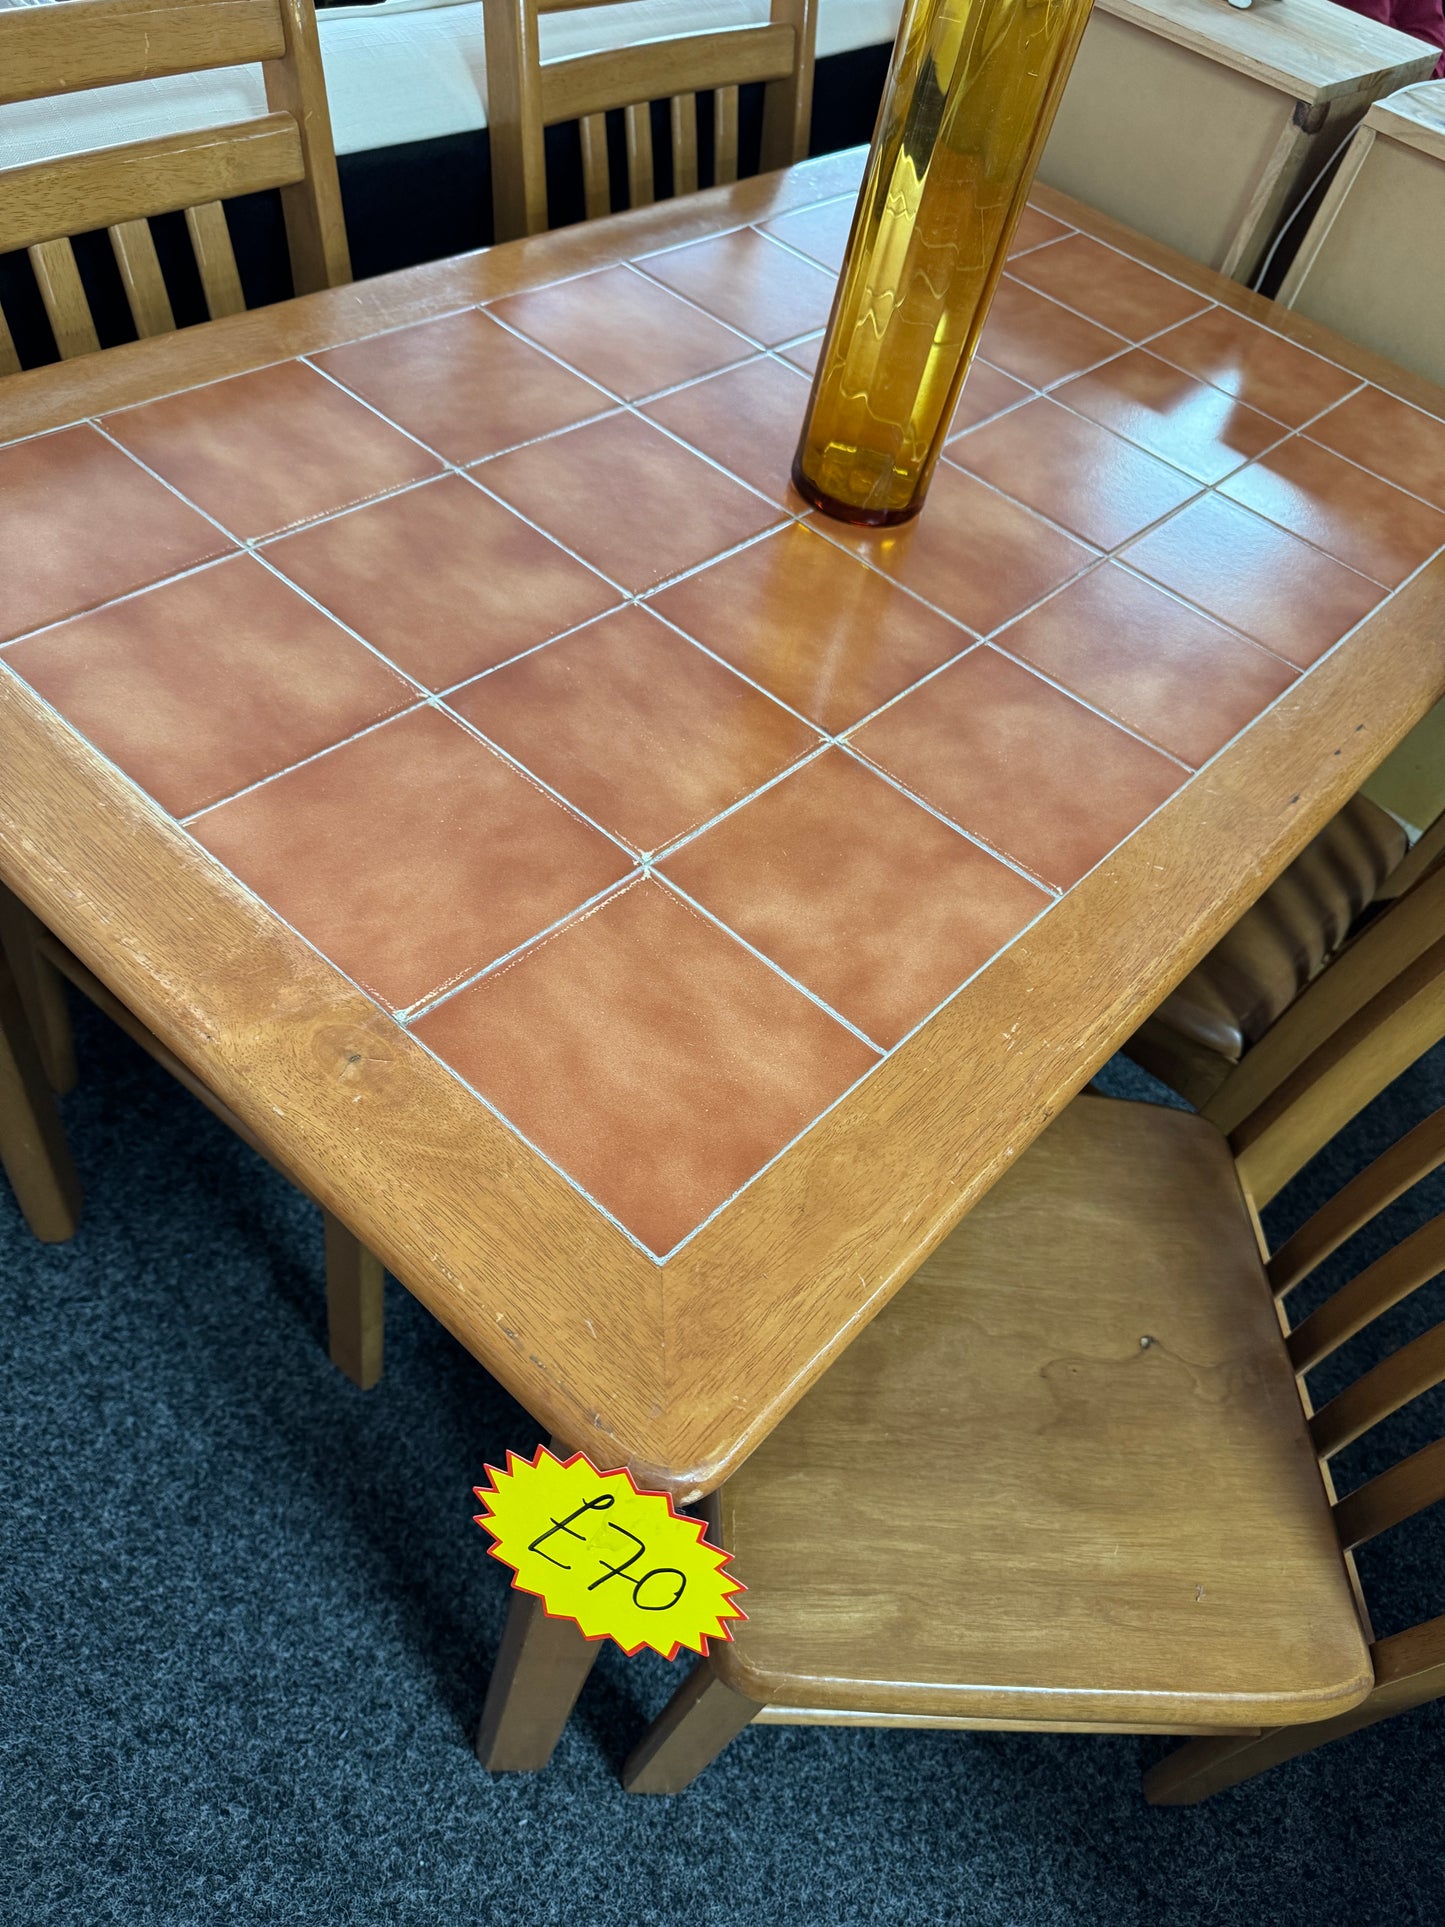 Tile top table and 4 chairs